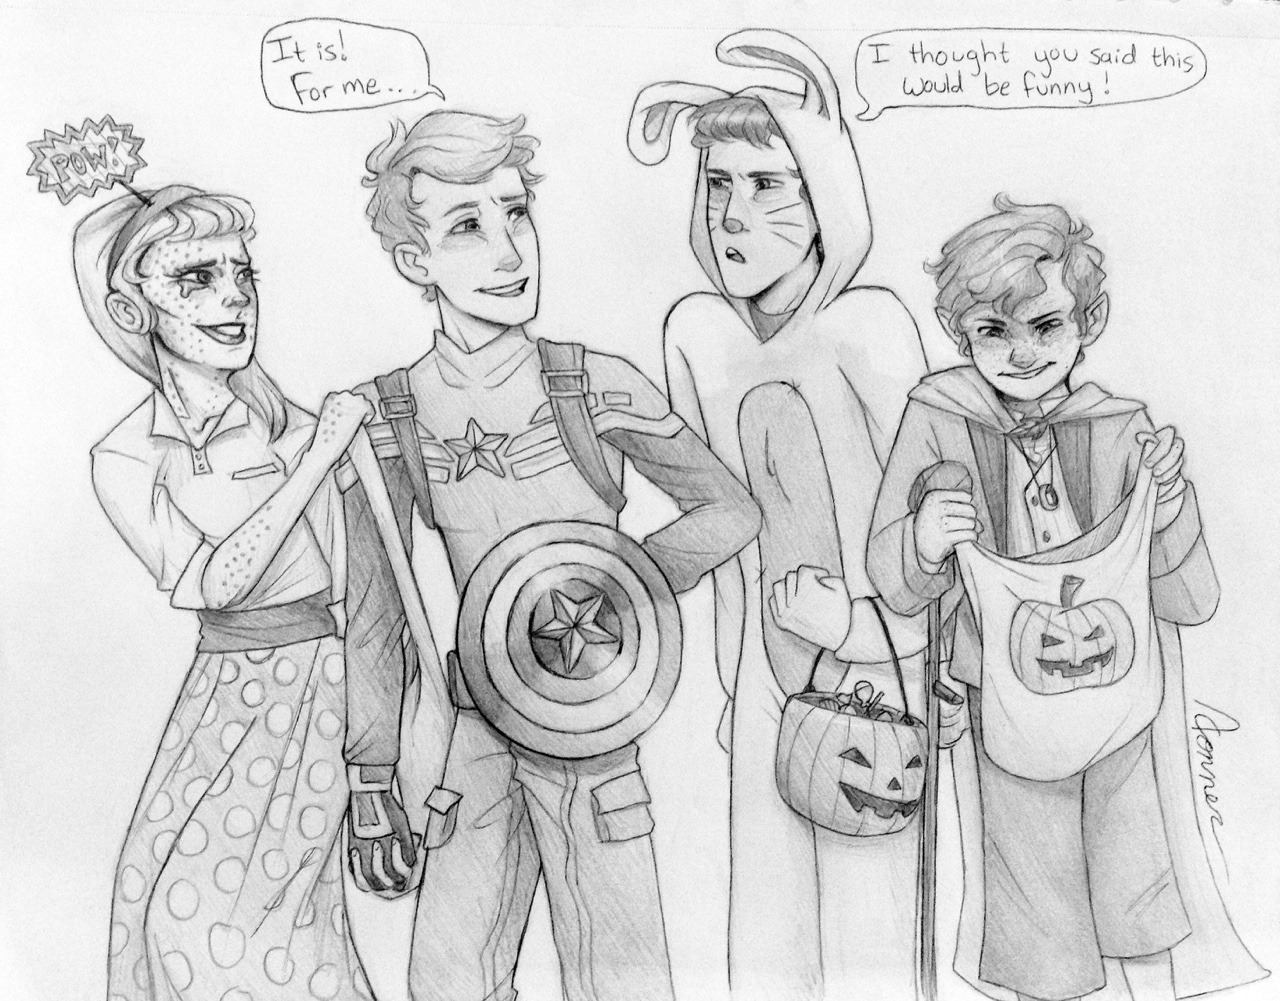 Fanart And Such Happy Late Halloween From The Newsies Gang